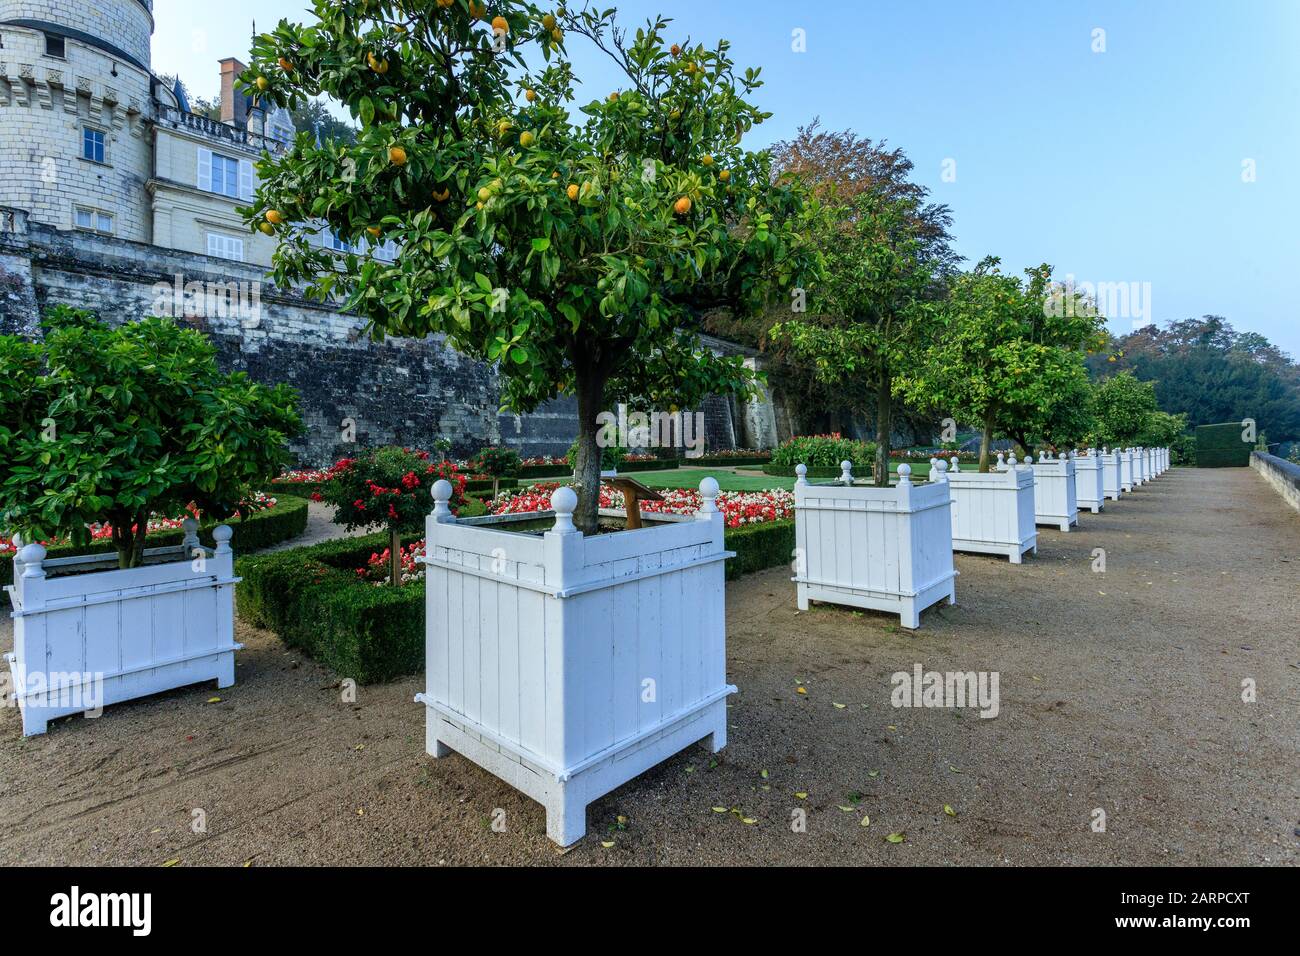 France, Indre et Loire, Loire Valley listed as World Heritage by UNESCO, Rigny Usse, Chateau d’Usse gardens, citrus fruits pots in October on the uppe Stock Photo